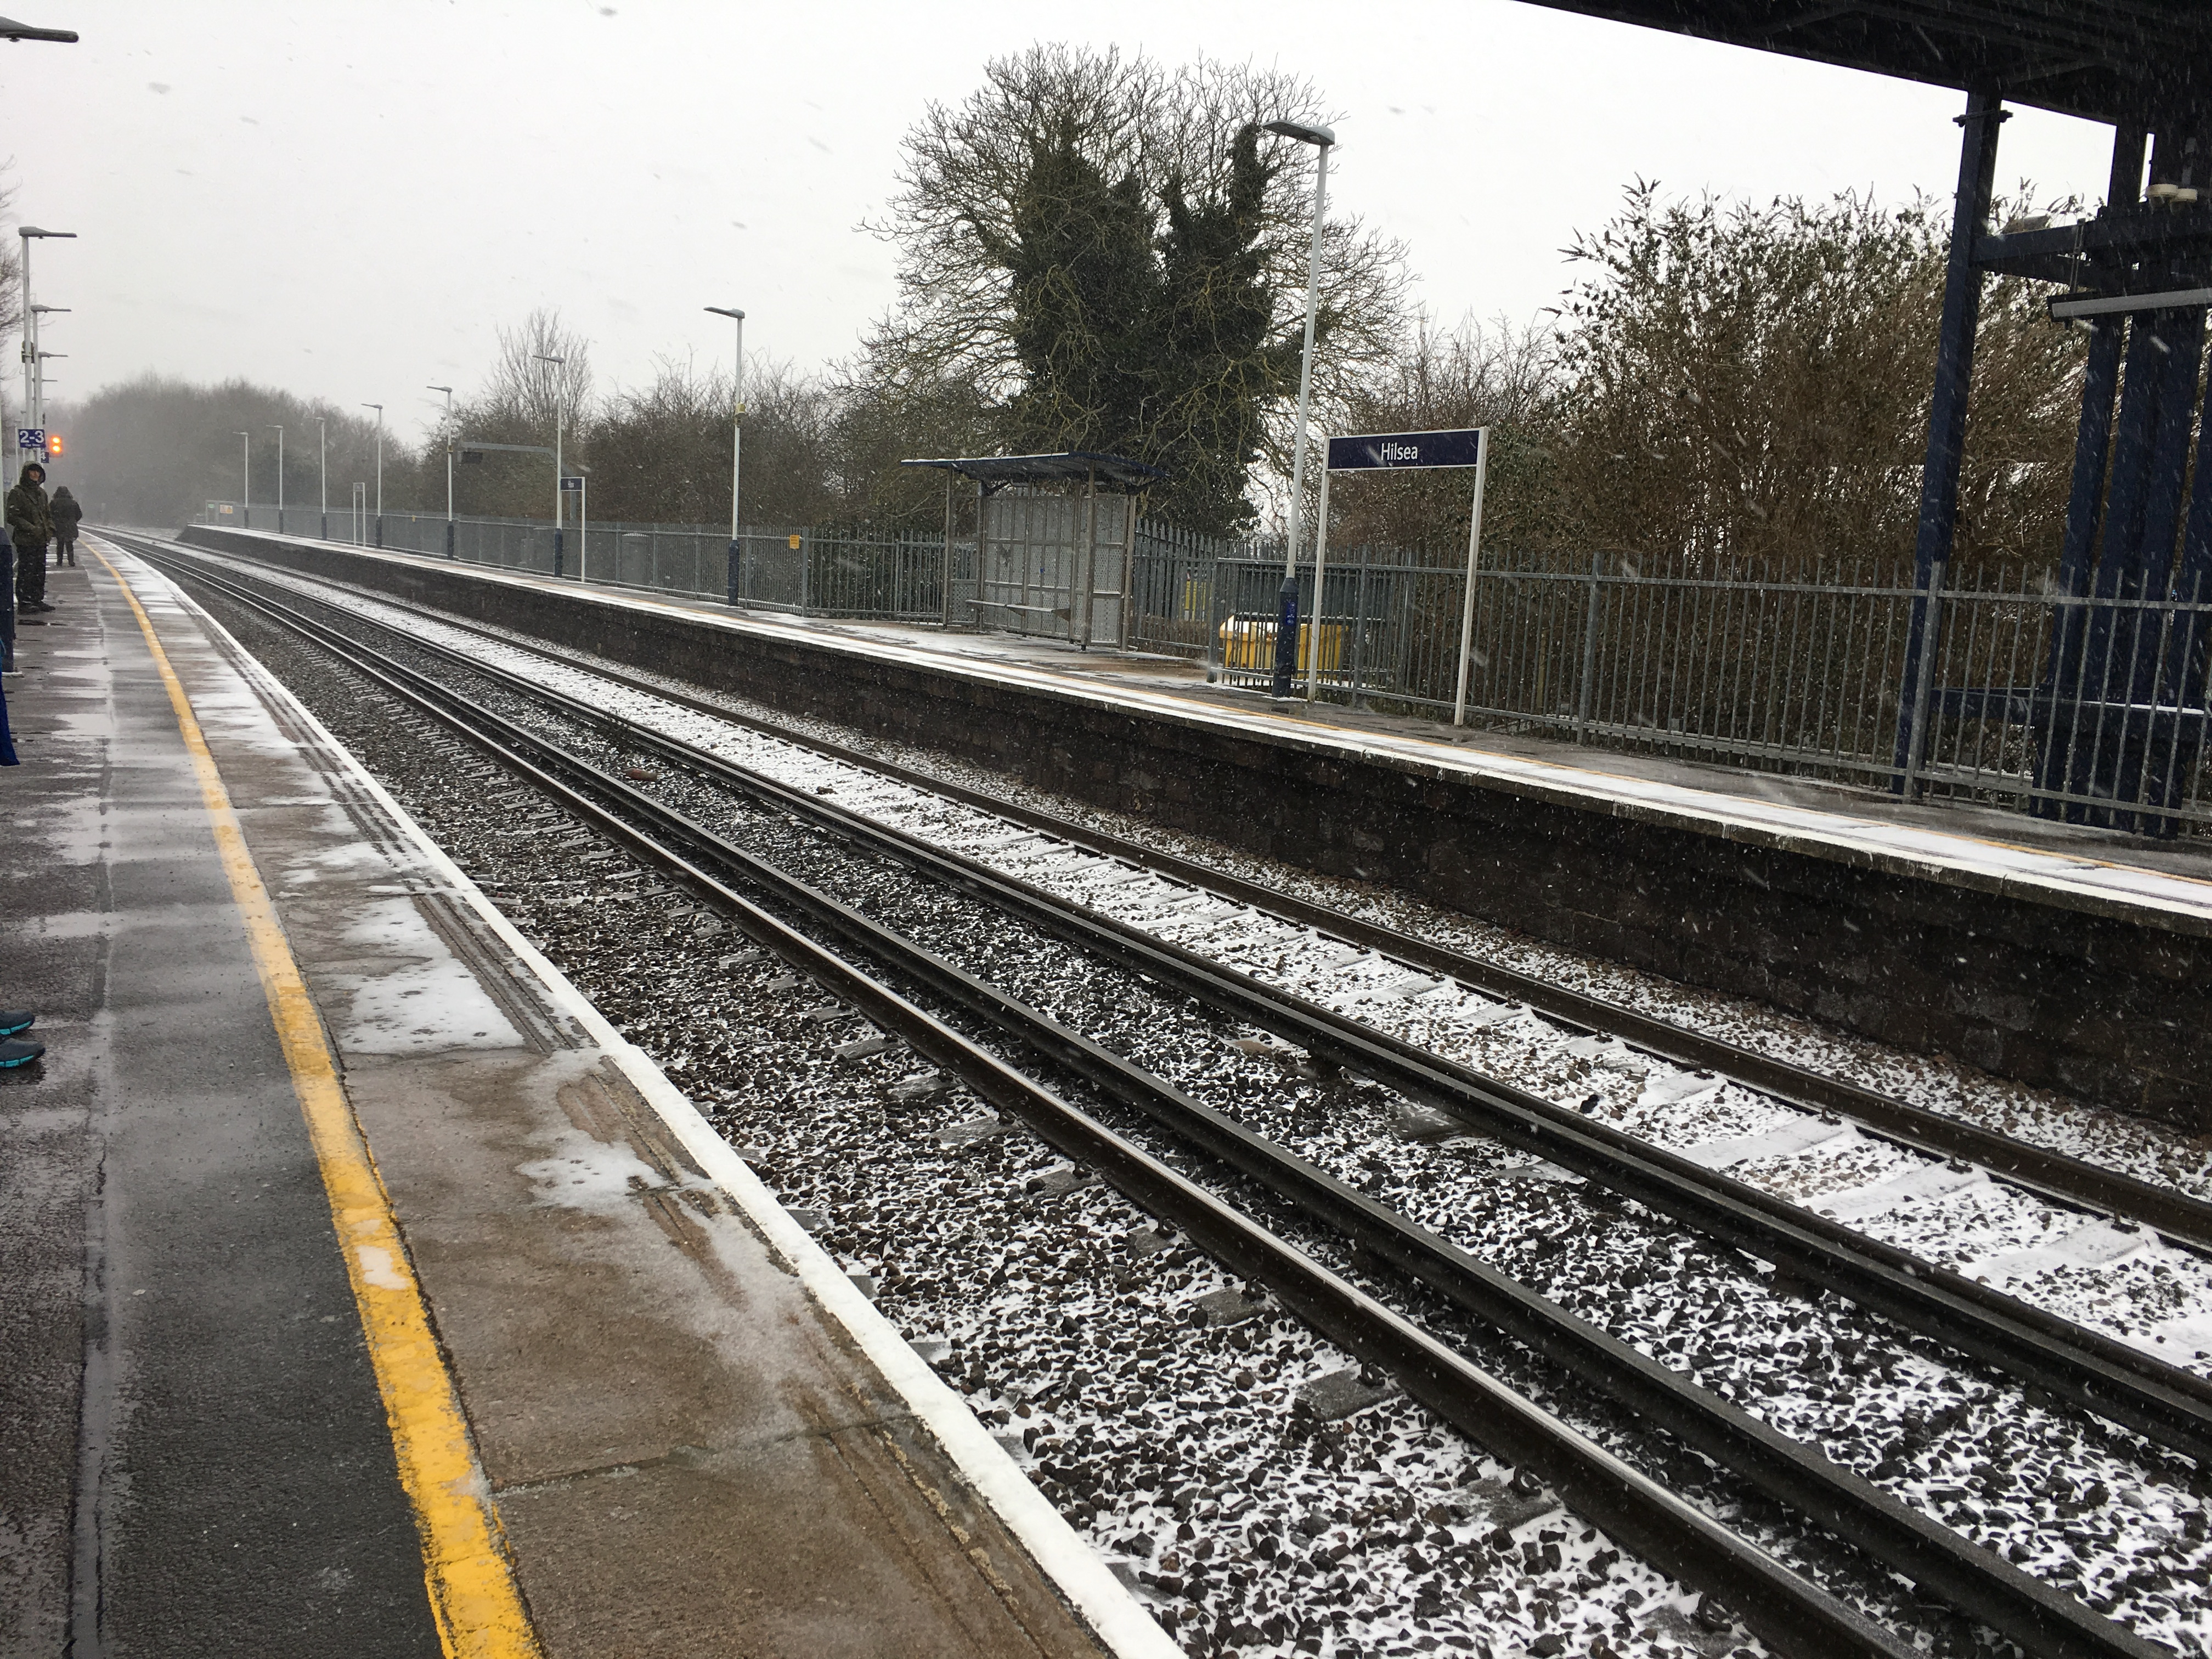 Railway station with two tracks and a platform either side. On the platforms and track ballast there is snow. There is snow flakes visible in the air going diagonally